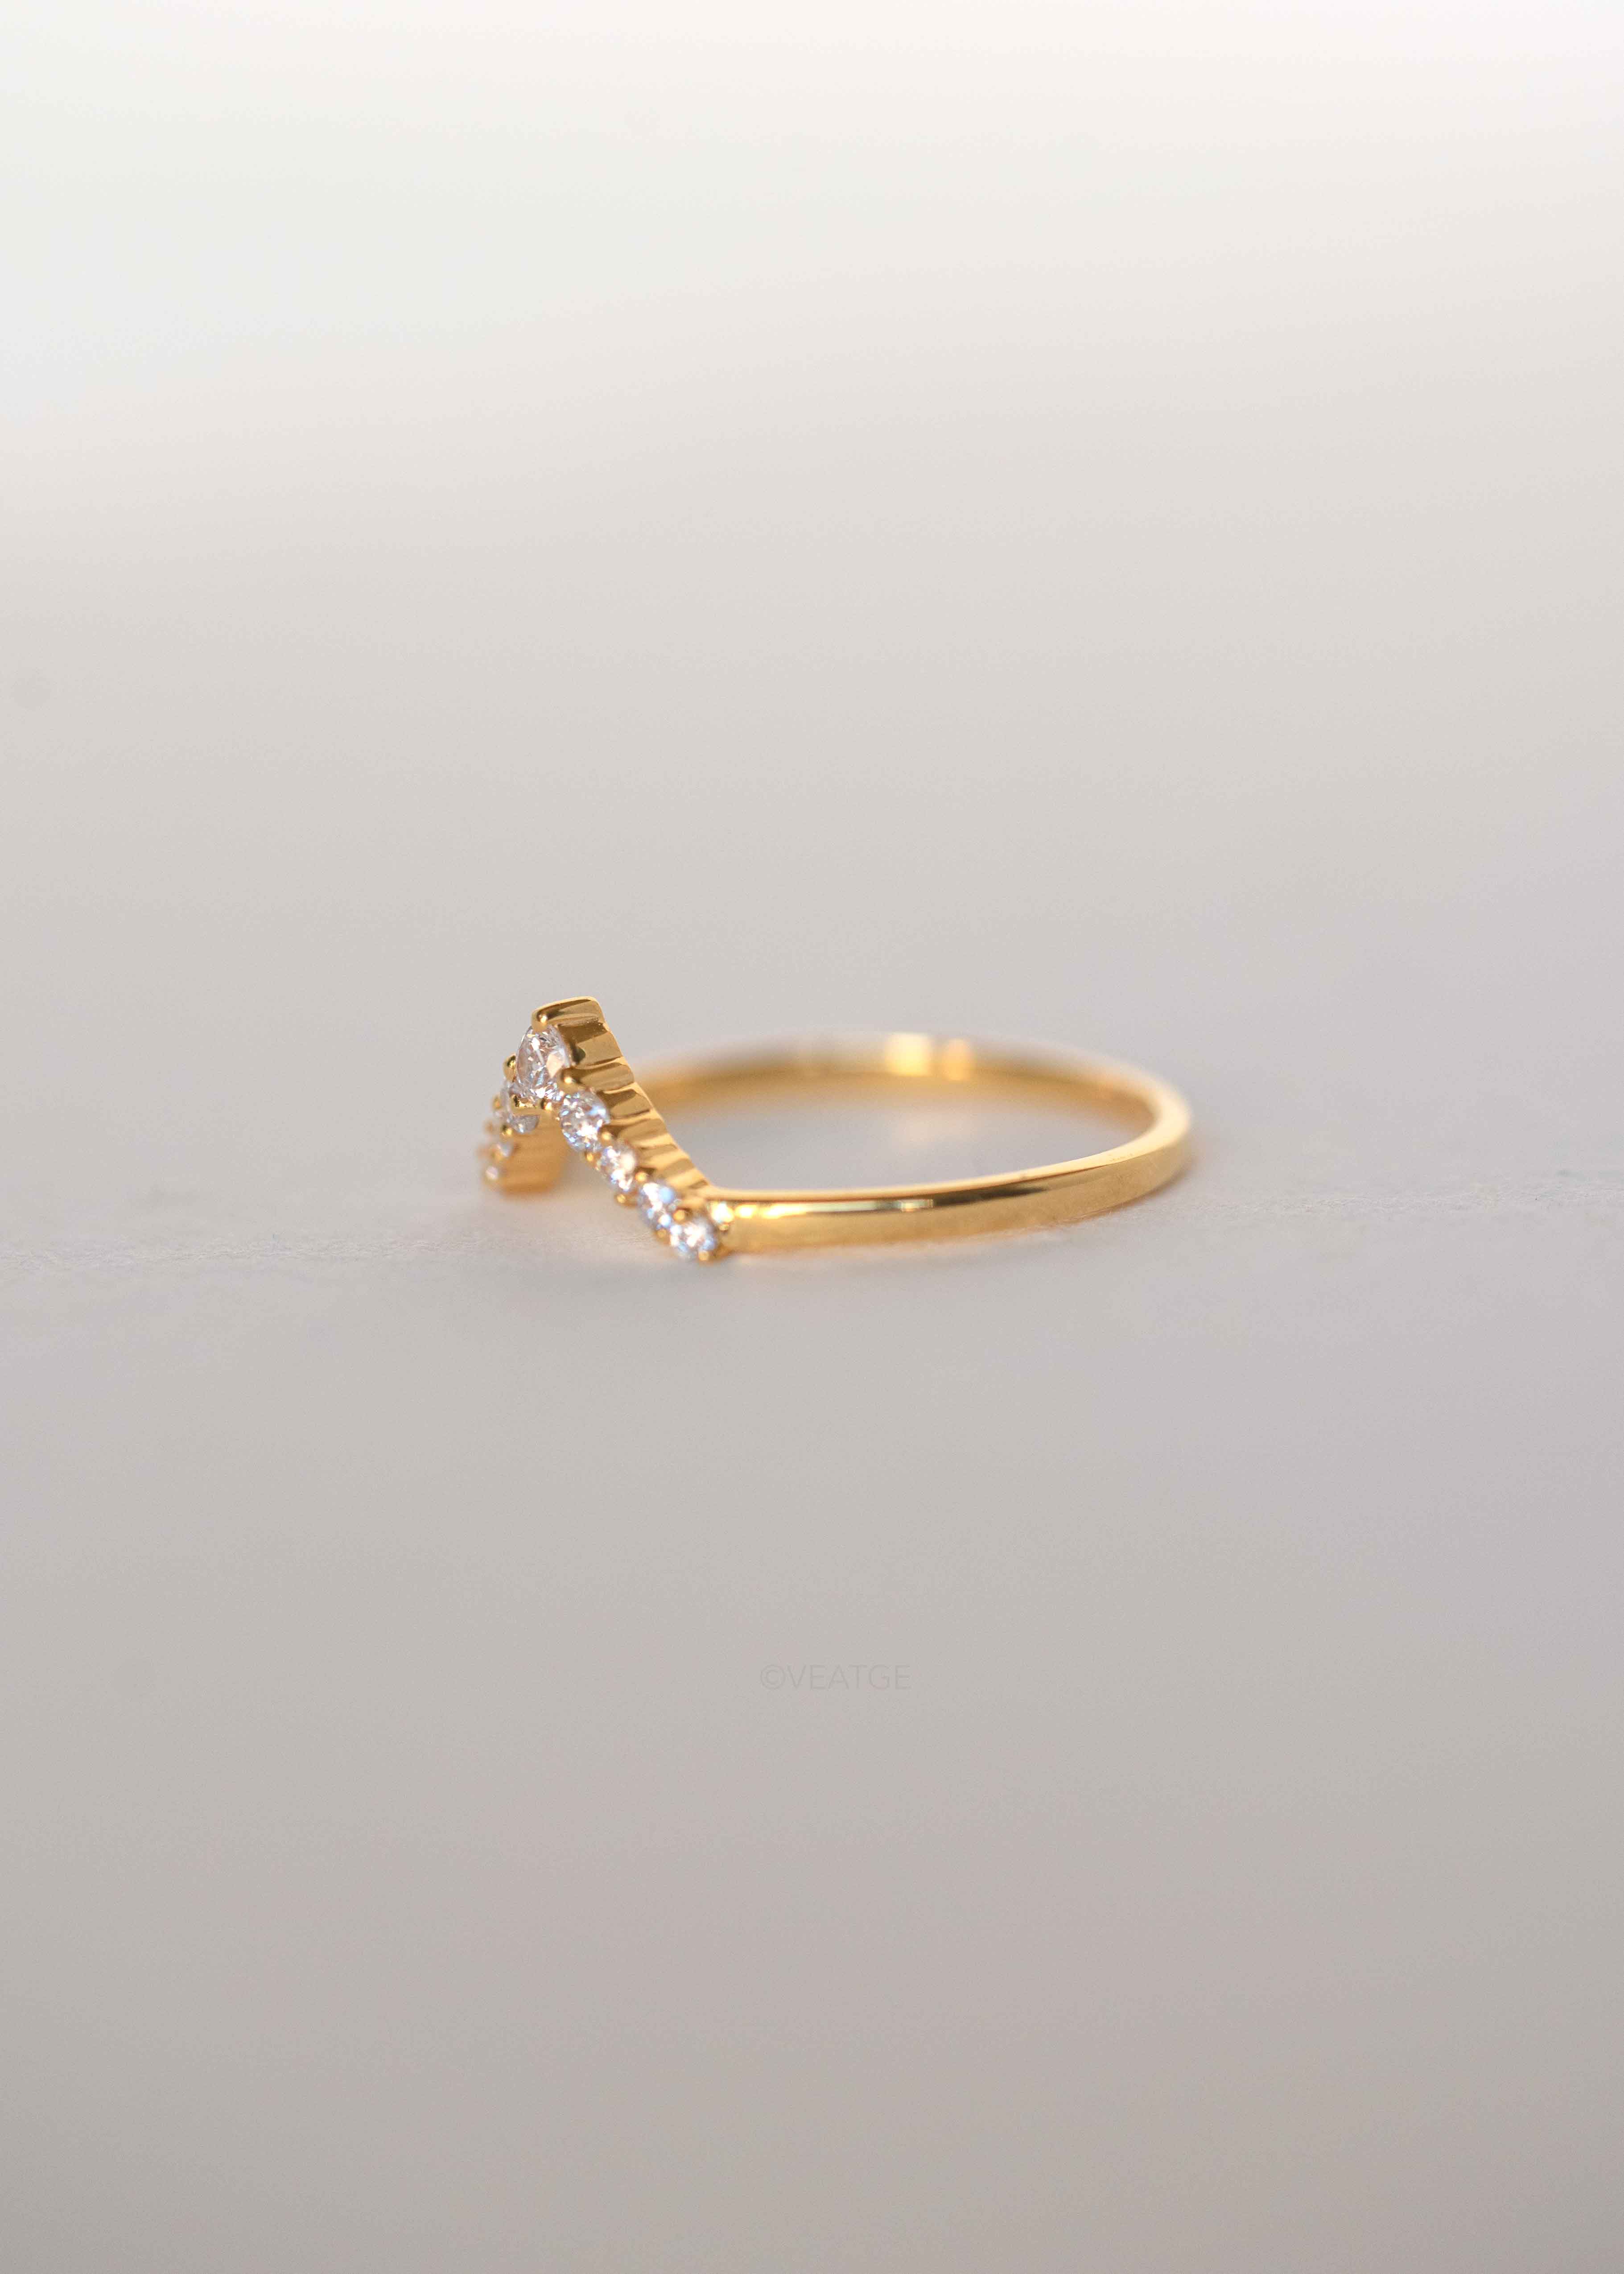 Gold Stacking Ring with diamonds, V Chevron Curved Ring for stack, Turo Ring